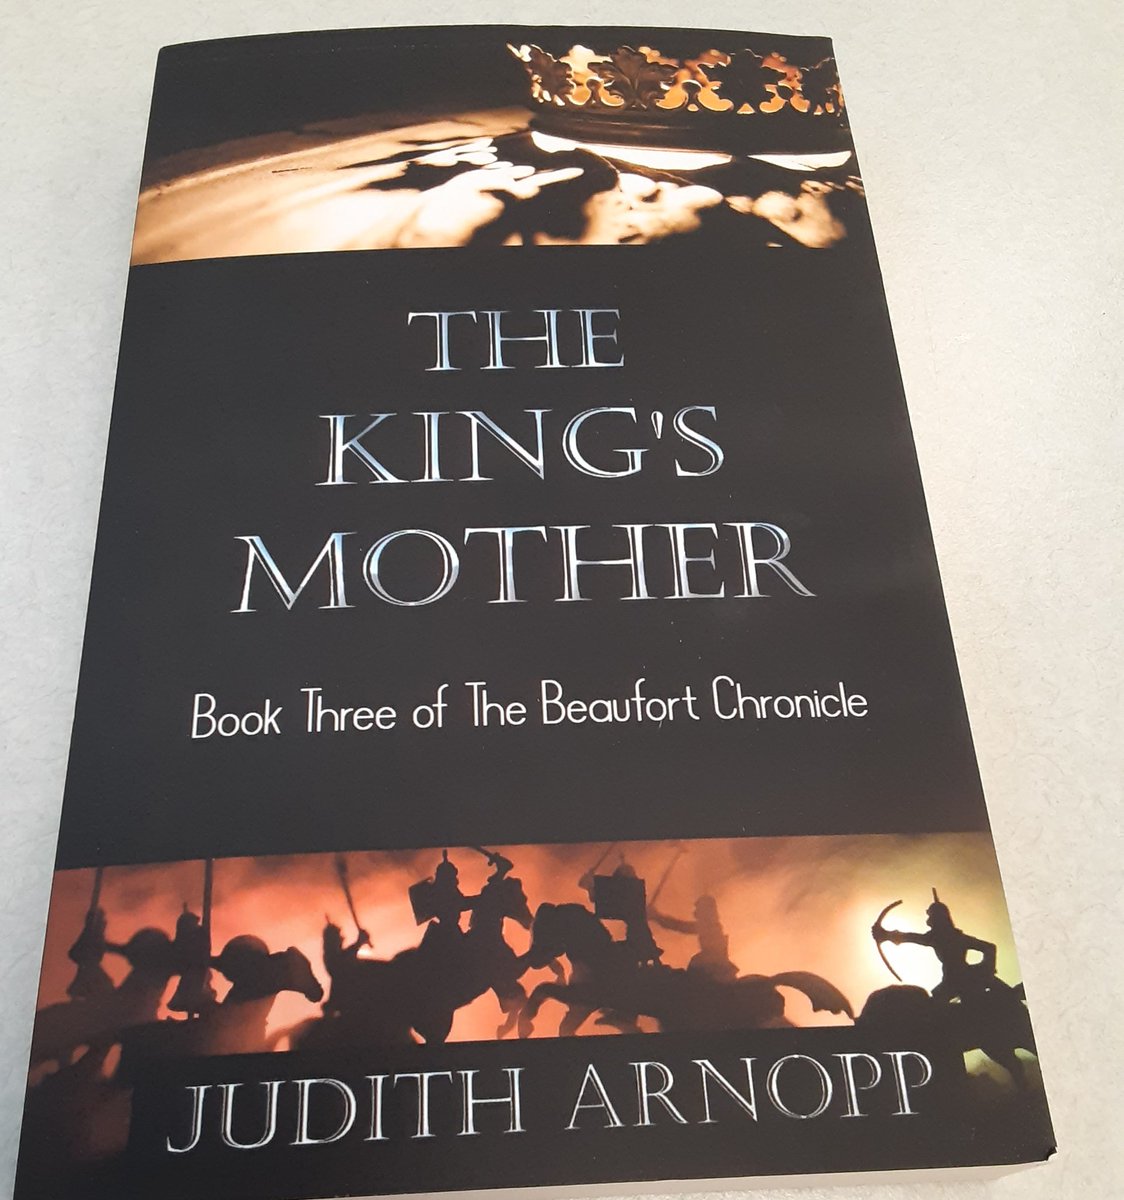 We have come to the epic conclusion of our adventure with Margaret Beaufort.  The King's Mother: Book Three of The Beaufort Chronicle by @JudithArnopp #book #thekingsmother  #margaretbeaufort #Tudors